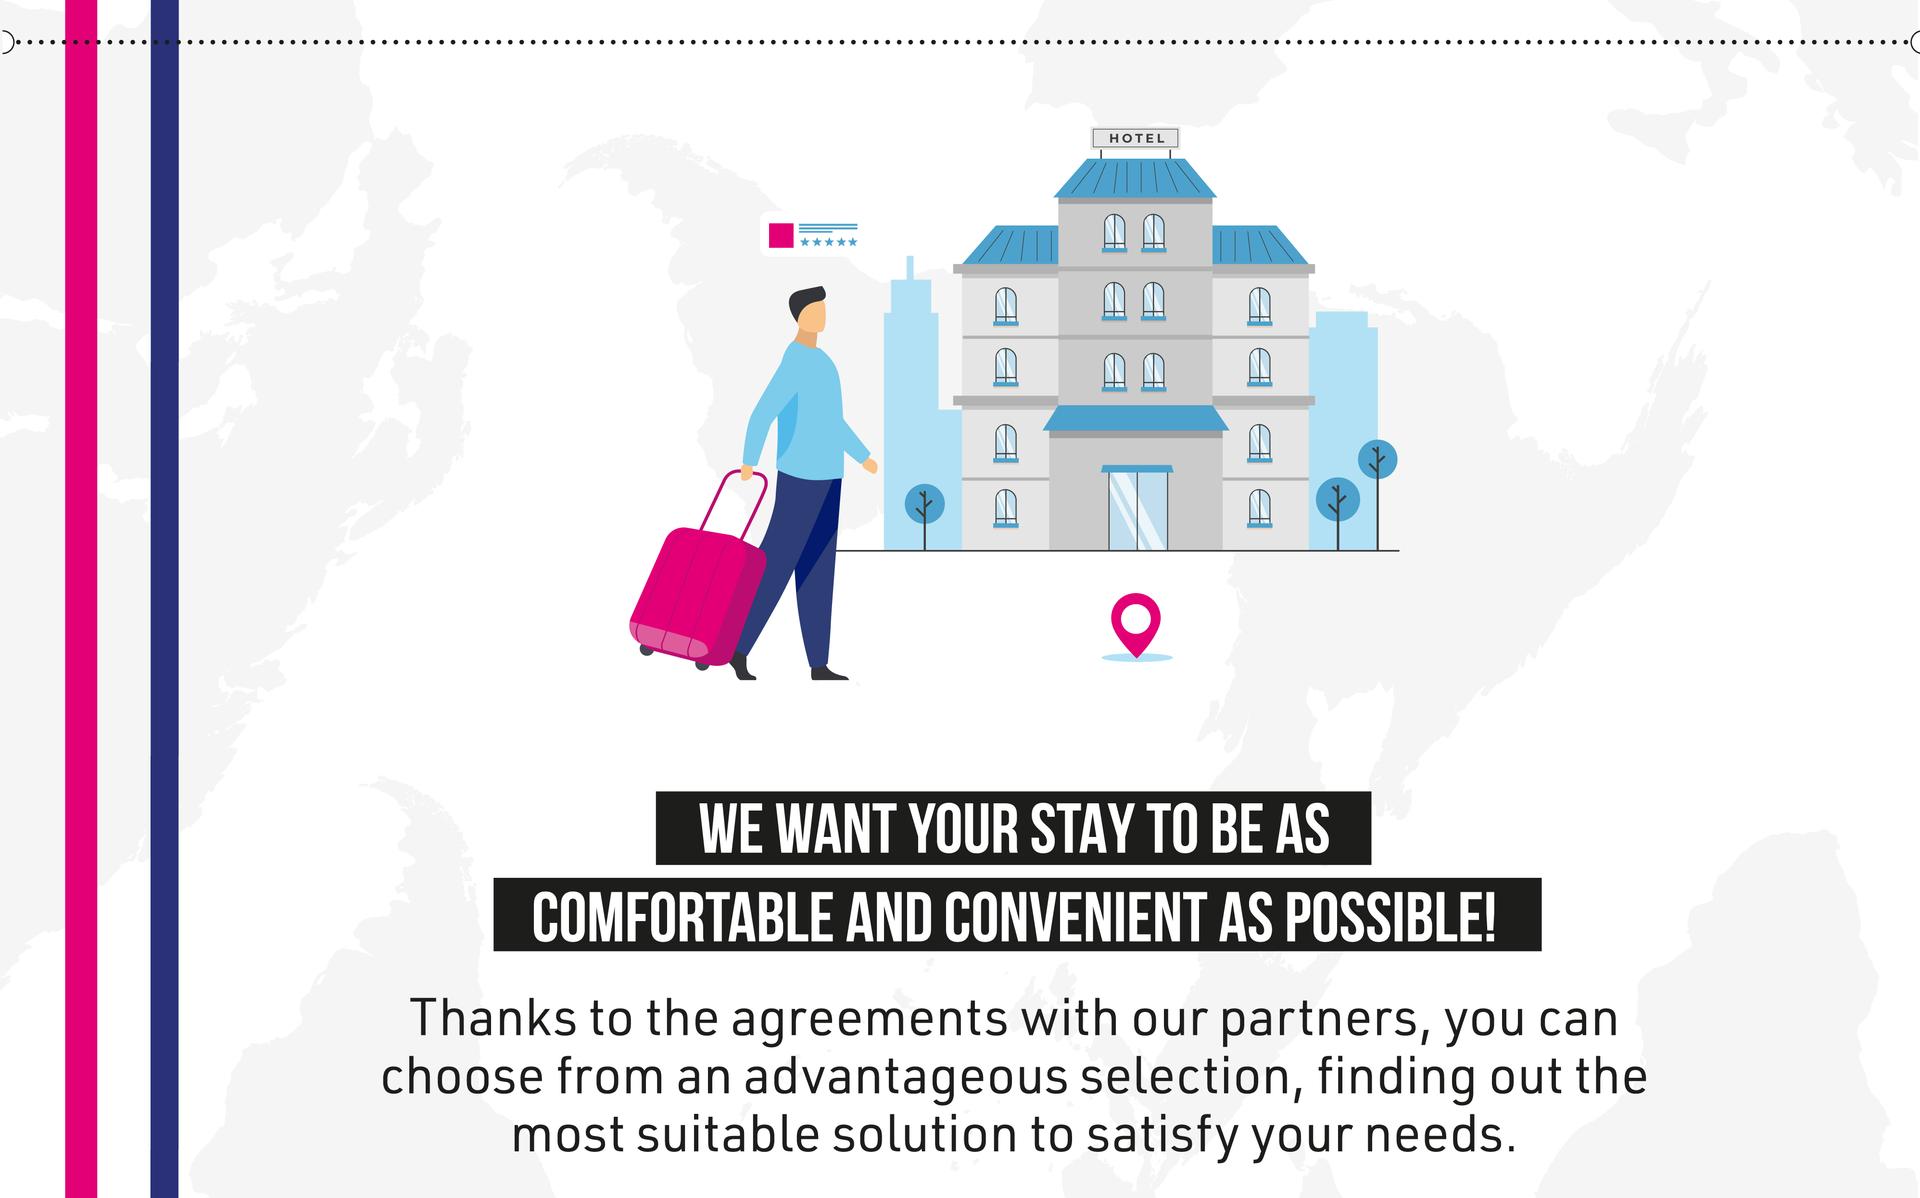 We want your stay to be as comfortable and convient as possible: discover agreements with our partners